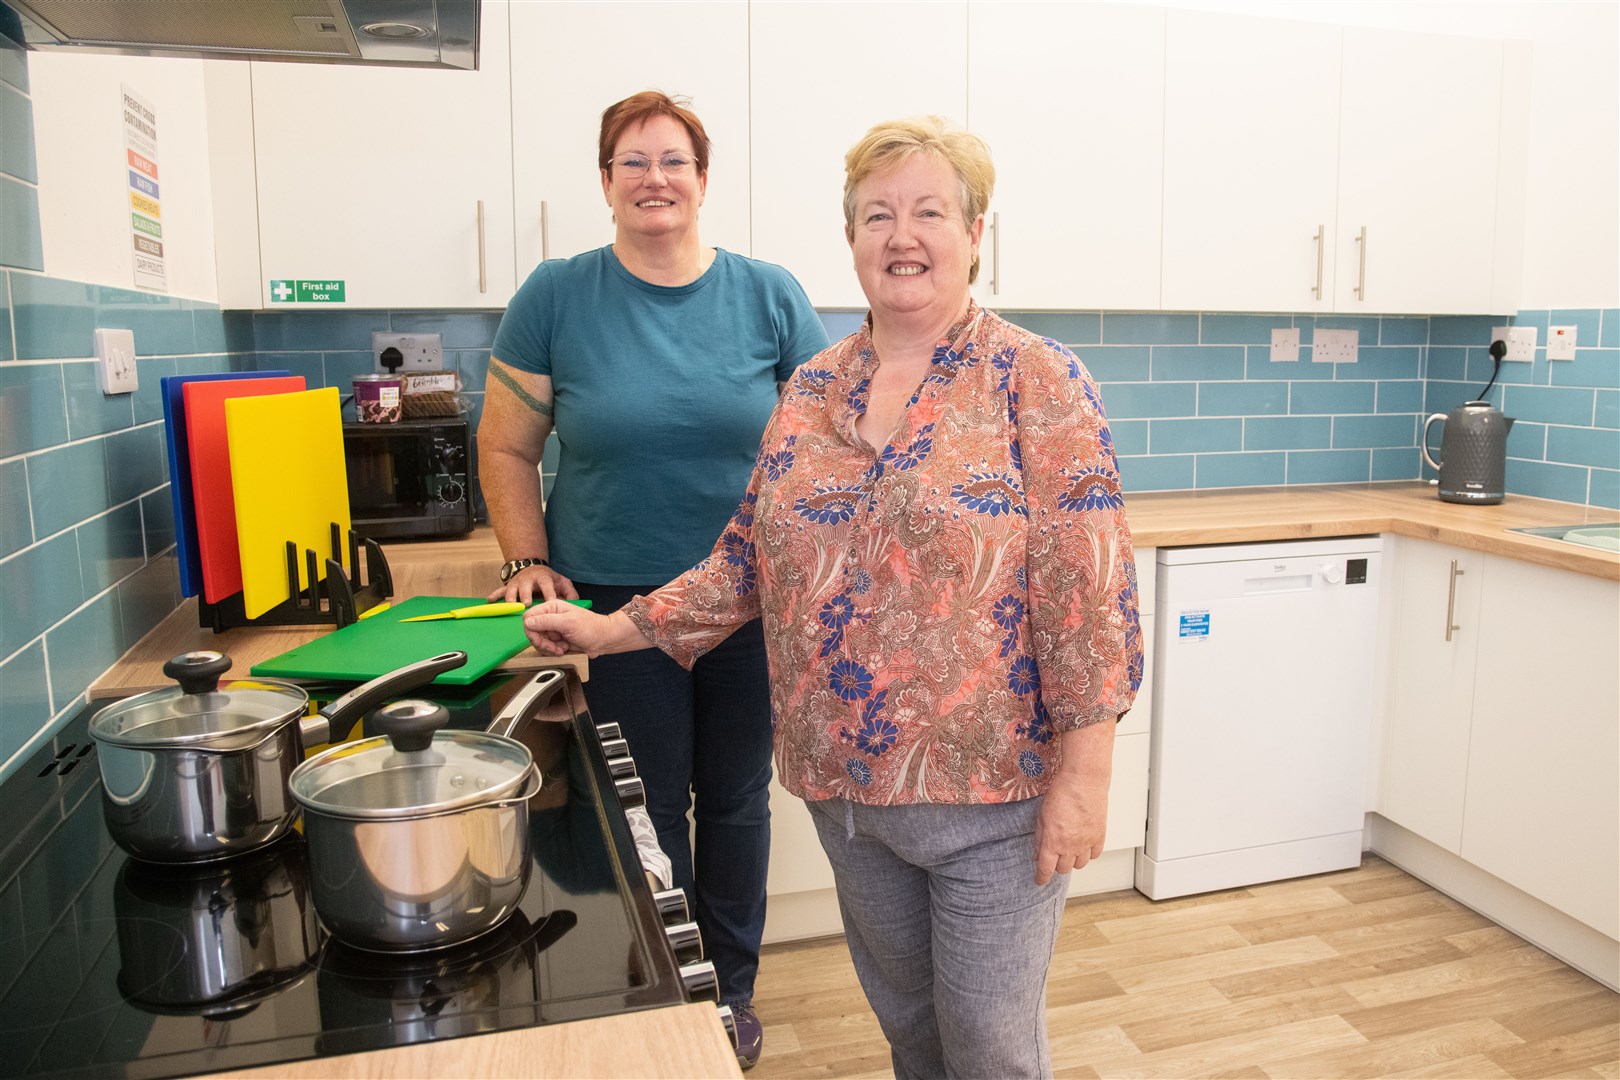 Community workers Sharon Whiteley (left) and Sandra Kennedy (right). Picture: Daniel Forsyth